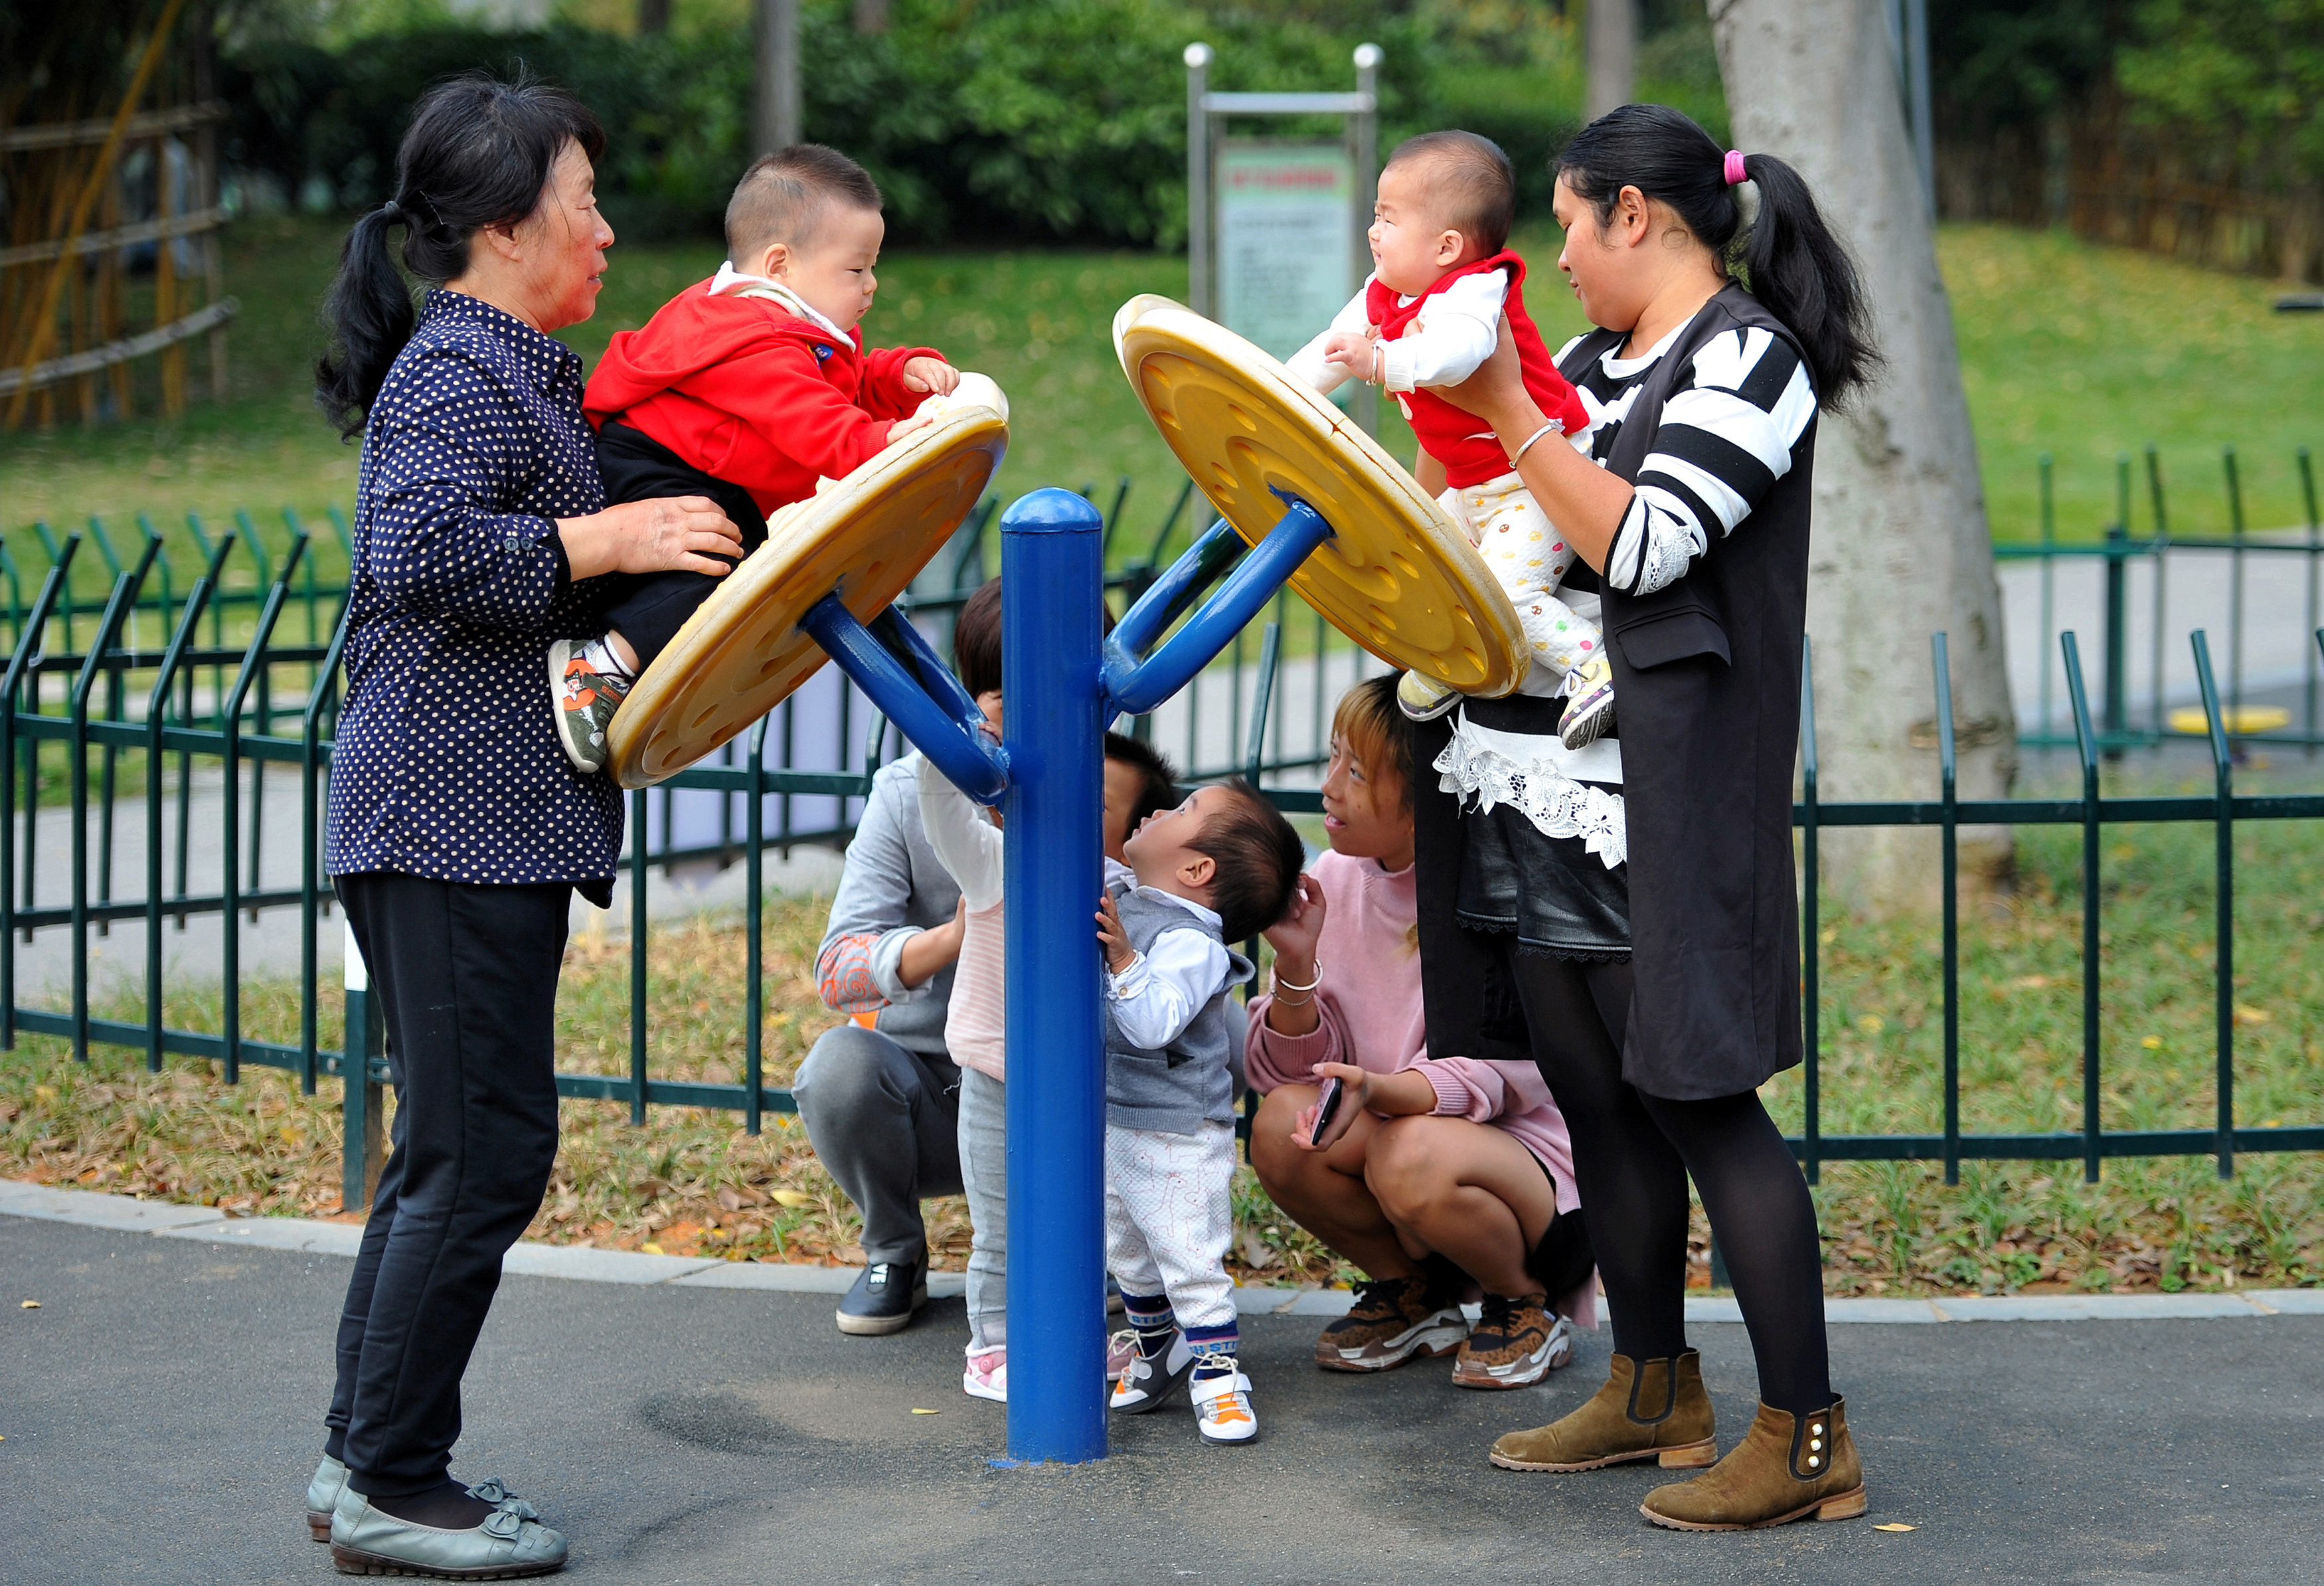 Women play with children at a park in Jinhua, Zhejiang province